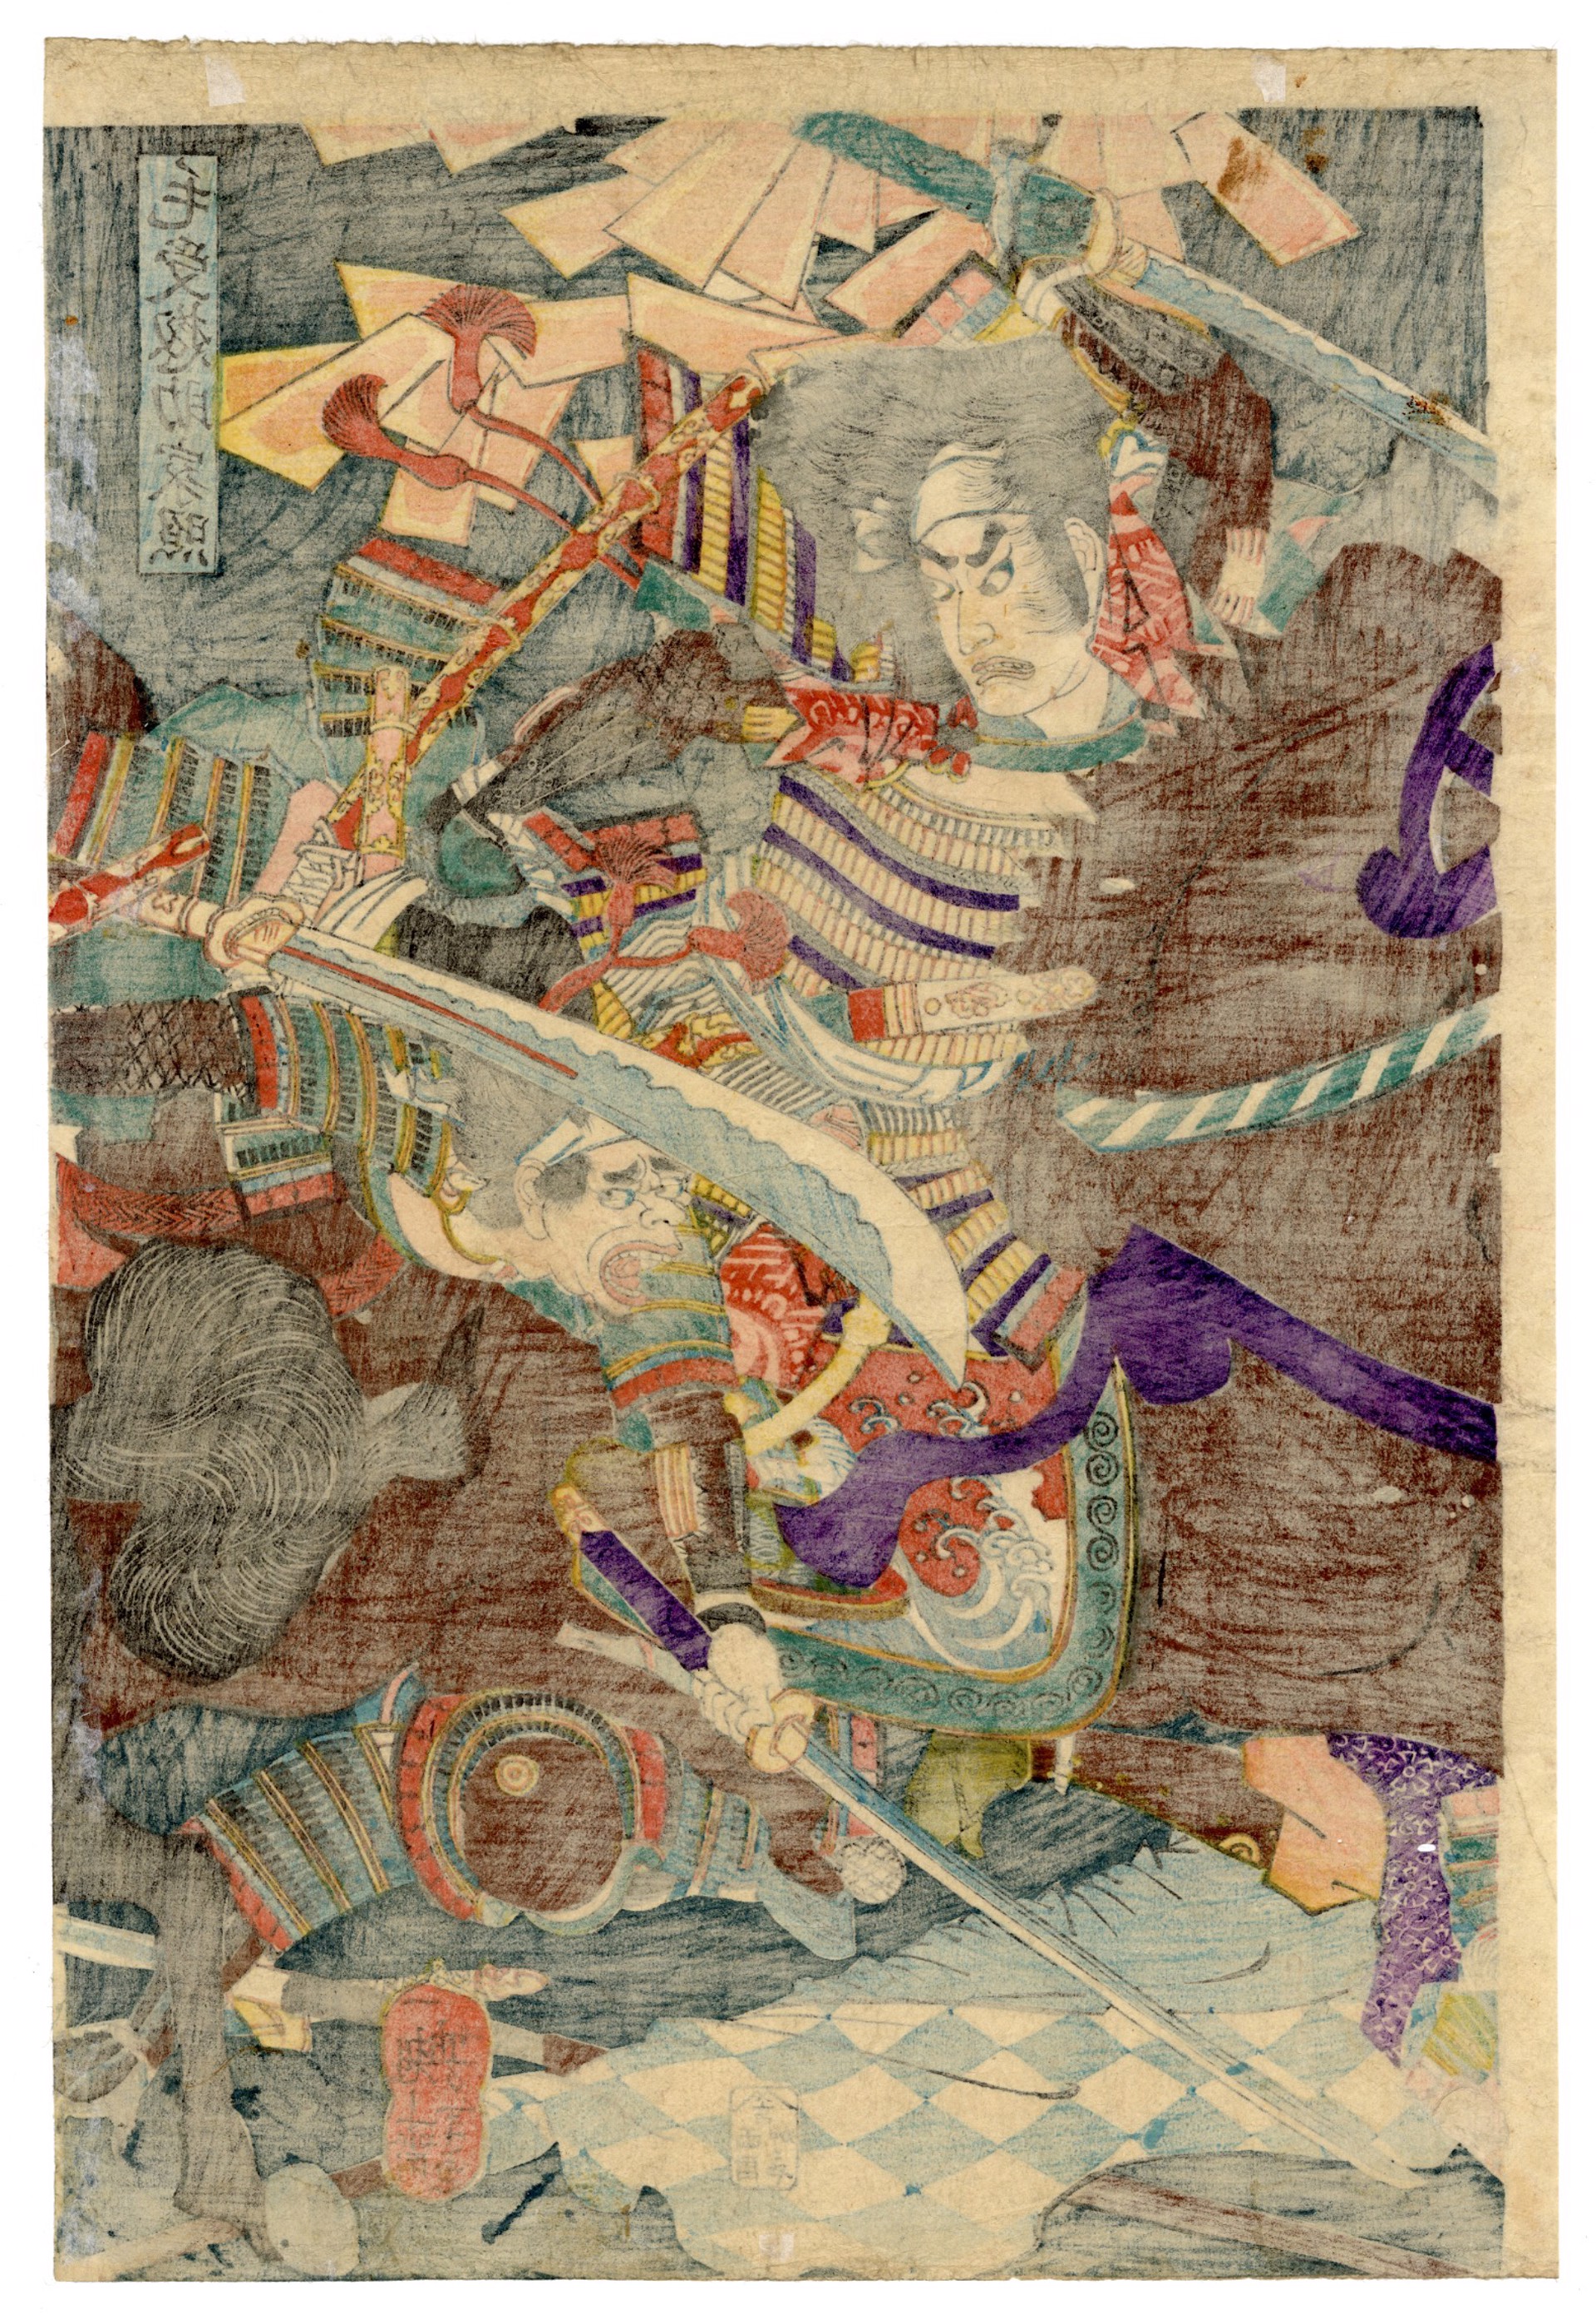 The Bloody Fight Between Two(2) Brave Warriors at the Great Battle of Shizugatake (1583) by Yoshitoshi